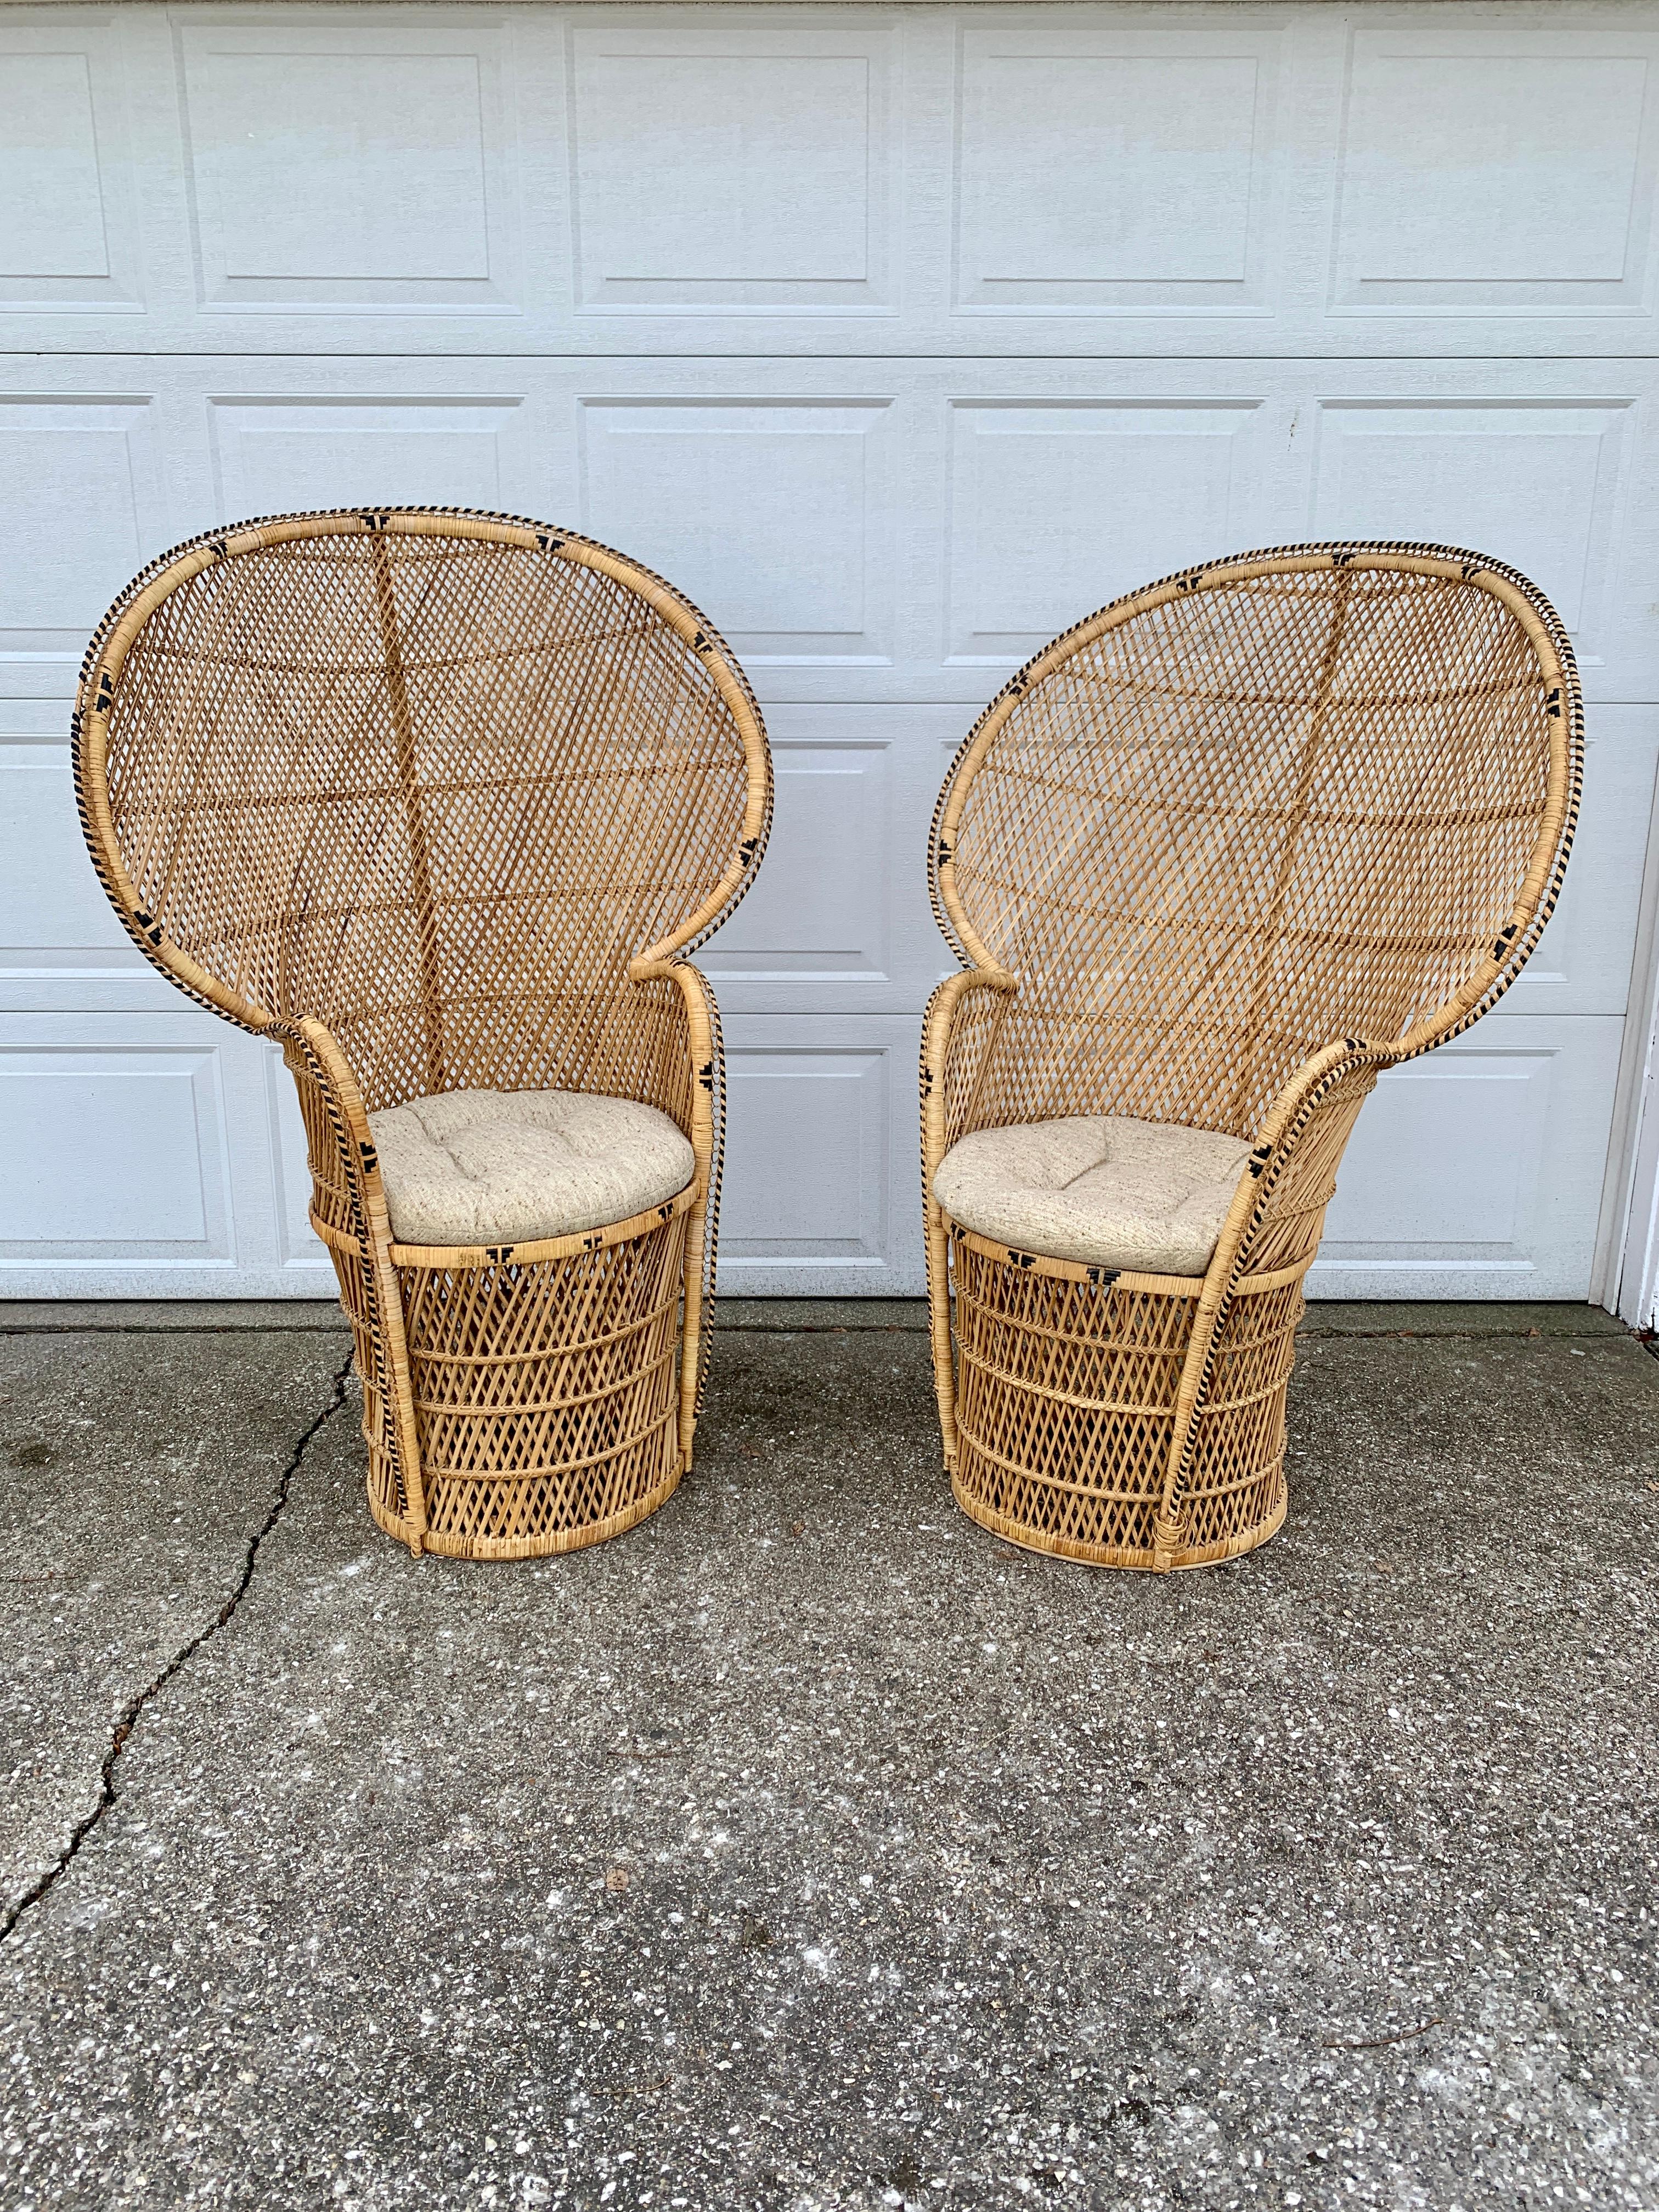 Bohemian Wicker Emanuelle Peacock Chairs, Pair For Sale 6